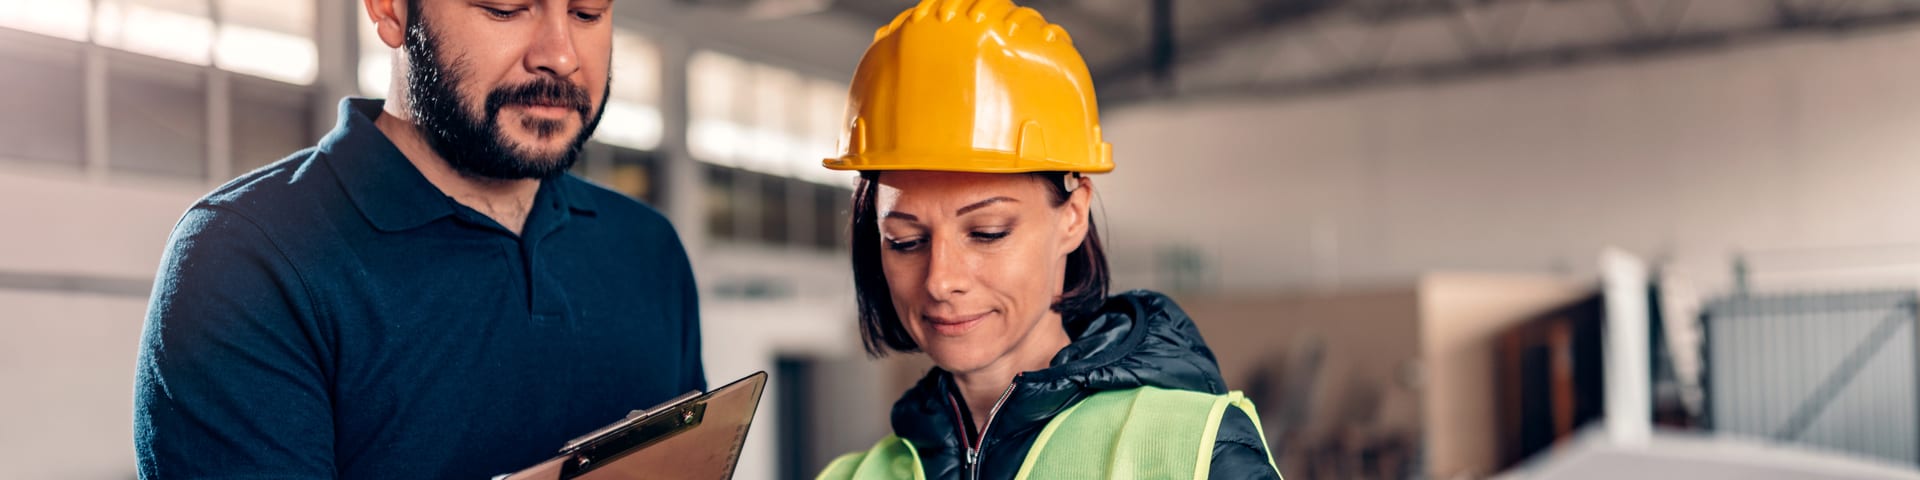 Construction Site Safety Inspections – What To Include at the Start of the Project?